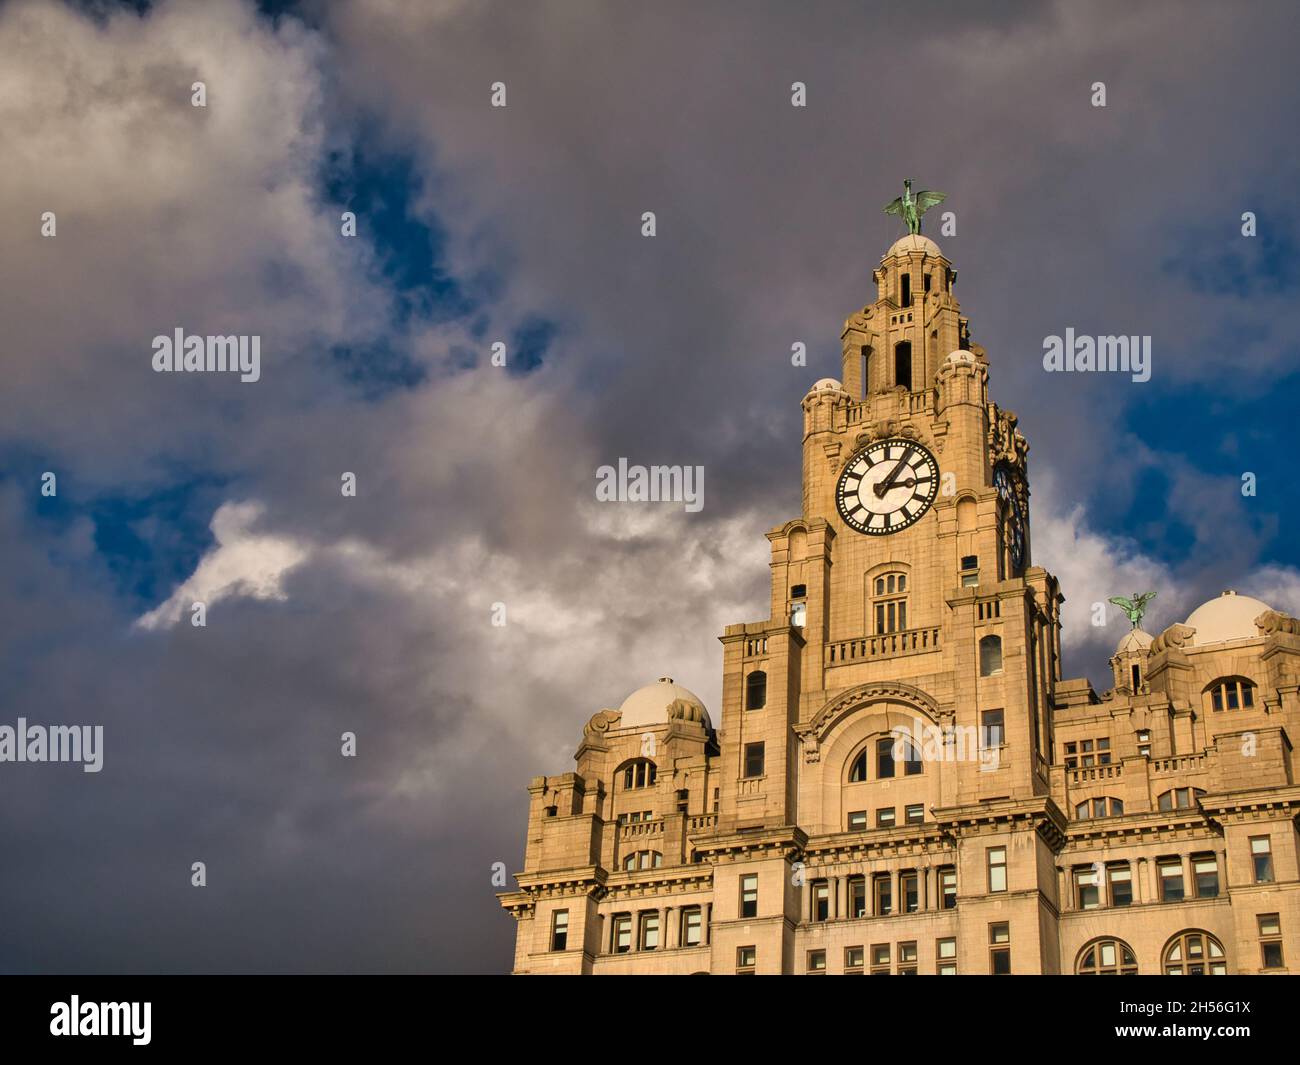 The clock tower and upper frontage of the Royal Liver Building in Liverpool, UK. Taken on a sunny day with threatening grey clouds. Stock Photo